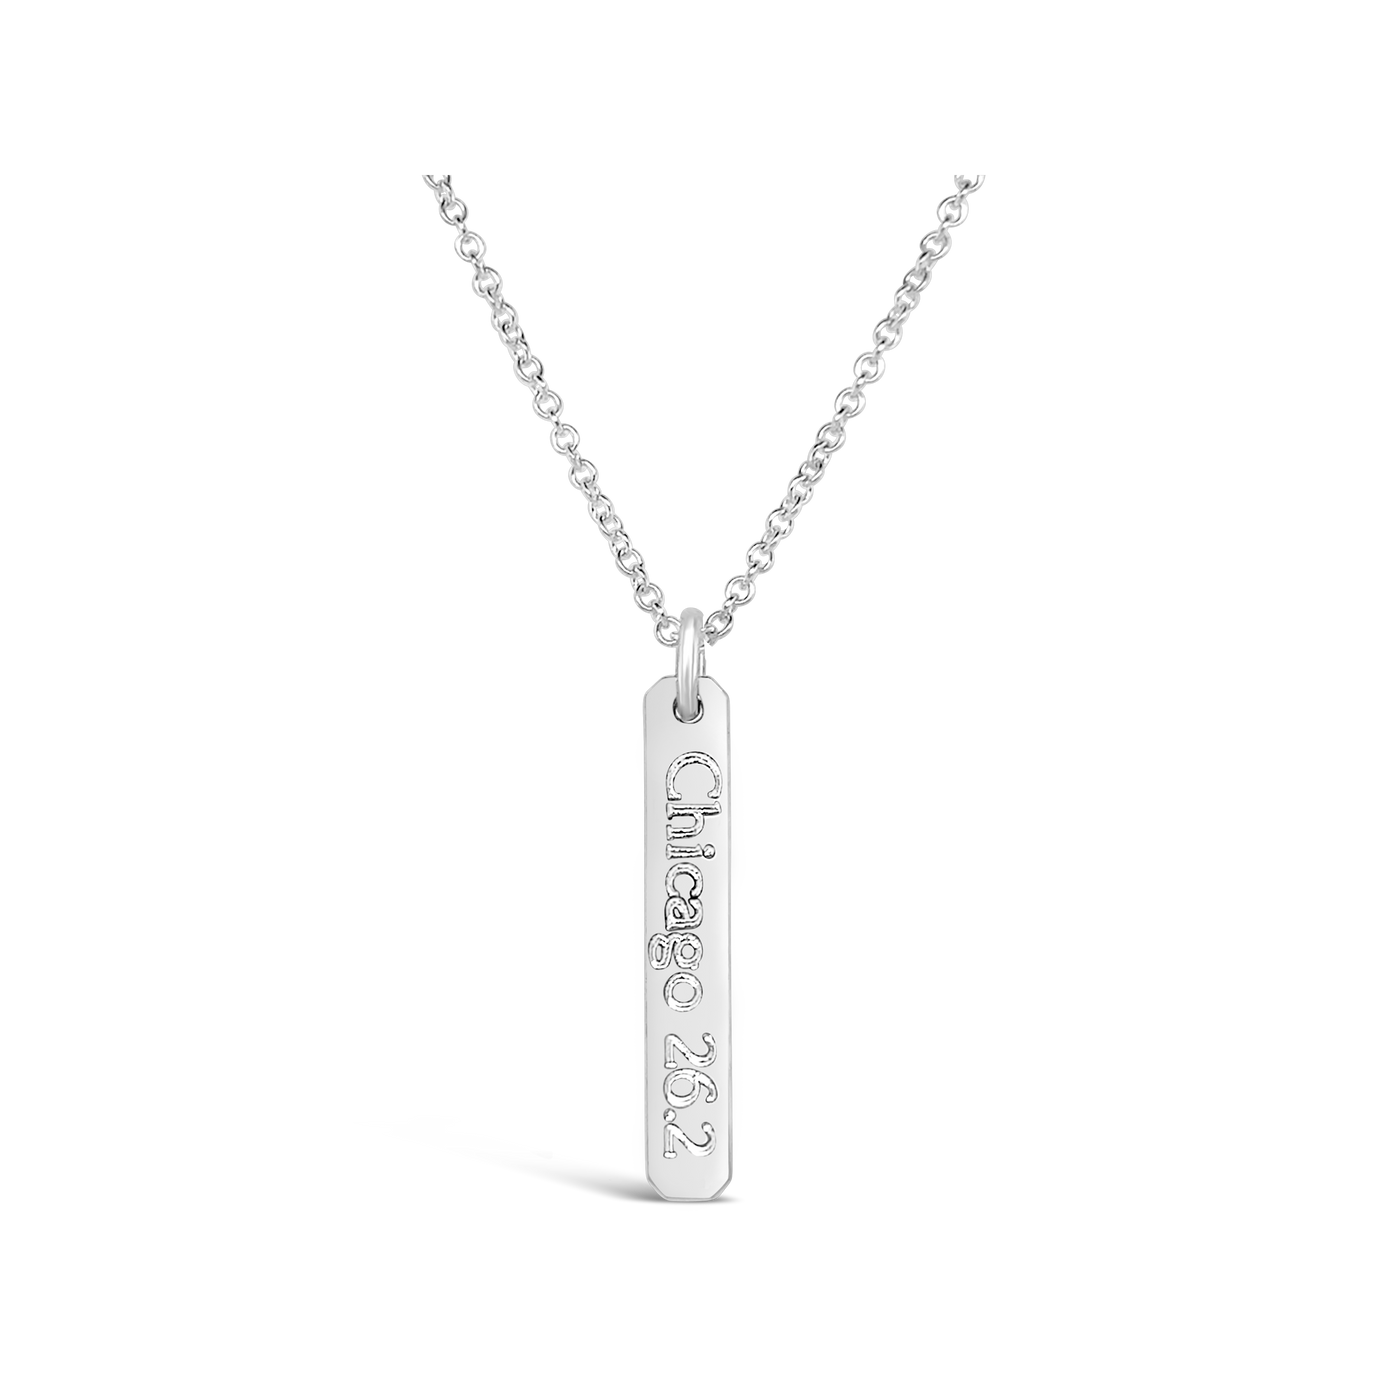 Chicago 26.2 Petite Rectangle Necklace